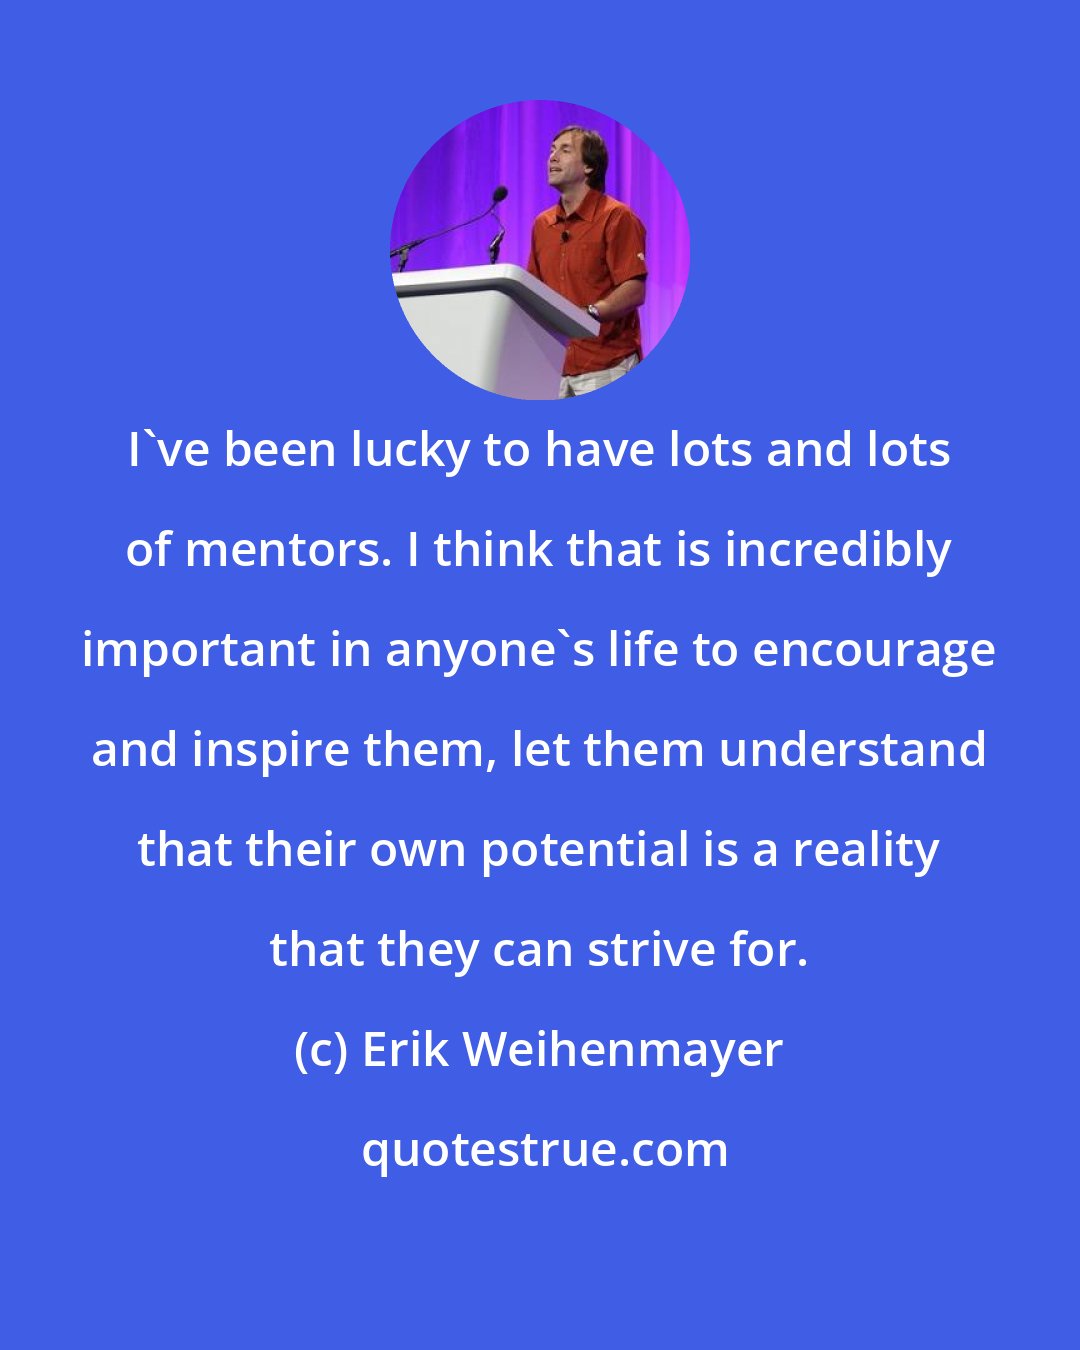 Erik Weihenmayer: I've been lucky to have lots and lots of mentors. I think that is incredibly important in anyone's life to encourage and inspire them, let them understand that their own potential is a reality that they can strive for.